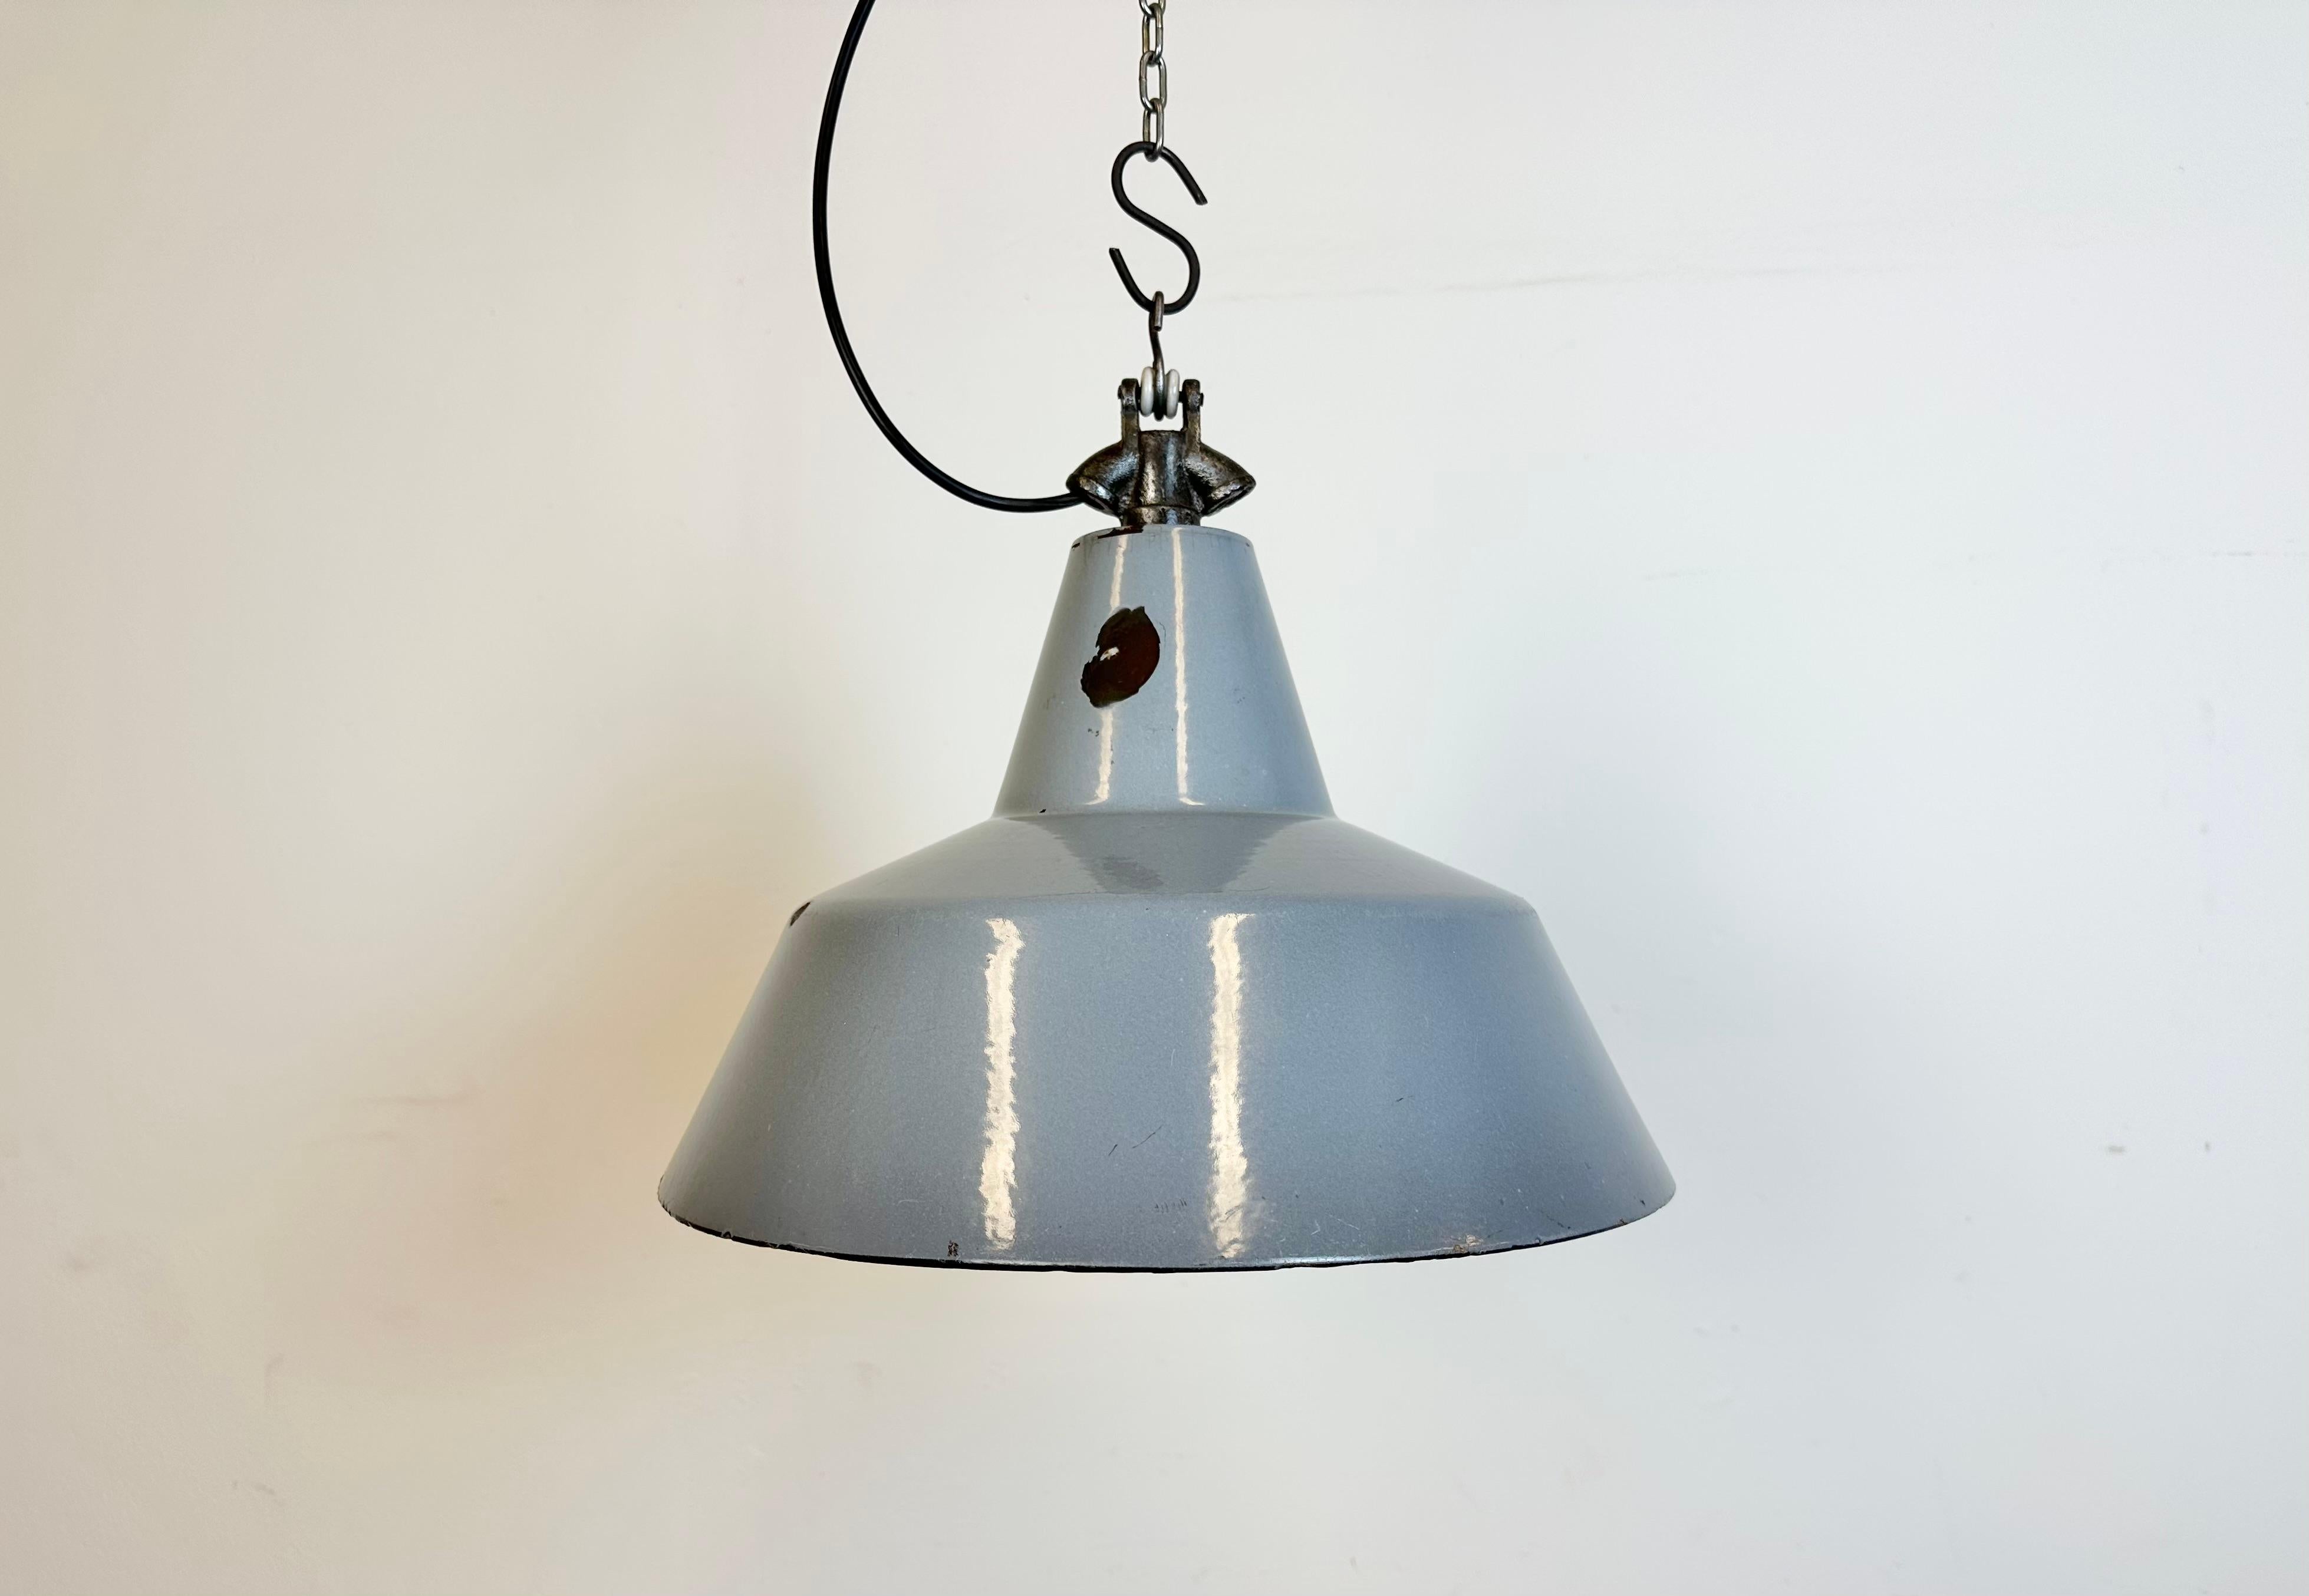 Industrial grey enamel factory pendant light made in Netherlands during the 1960s. White enamel inside the shade. Cast iron top. Porcelain socket requires standard E 27/ E26 light bulbs. New wire. Fully functional. The weight of the lamp is  1,1